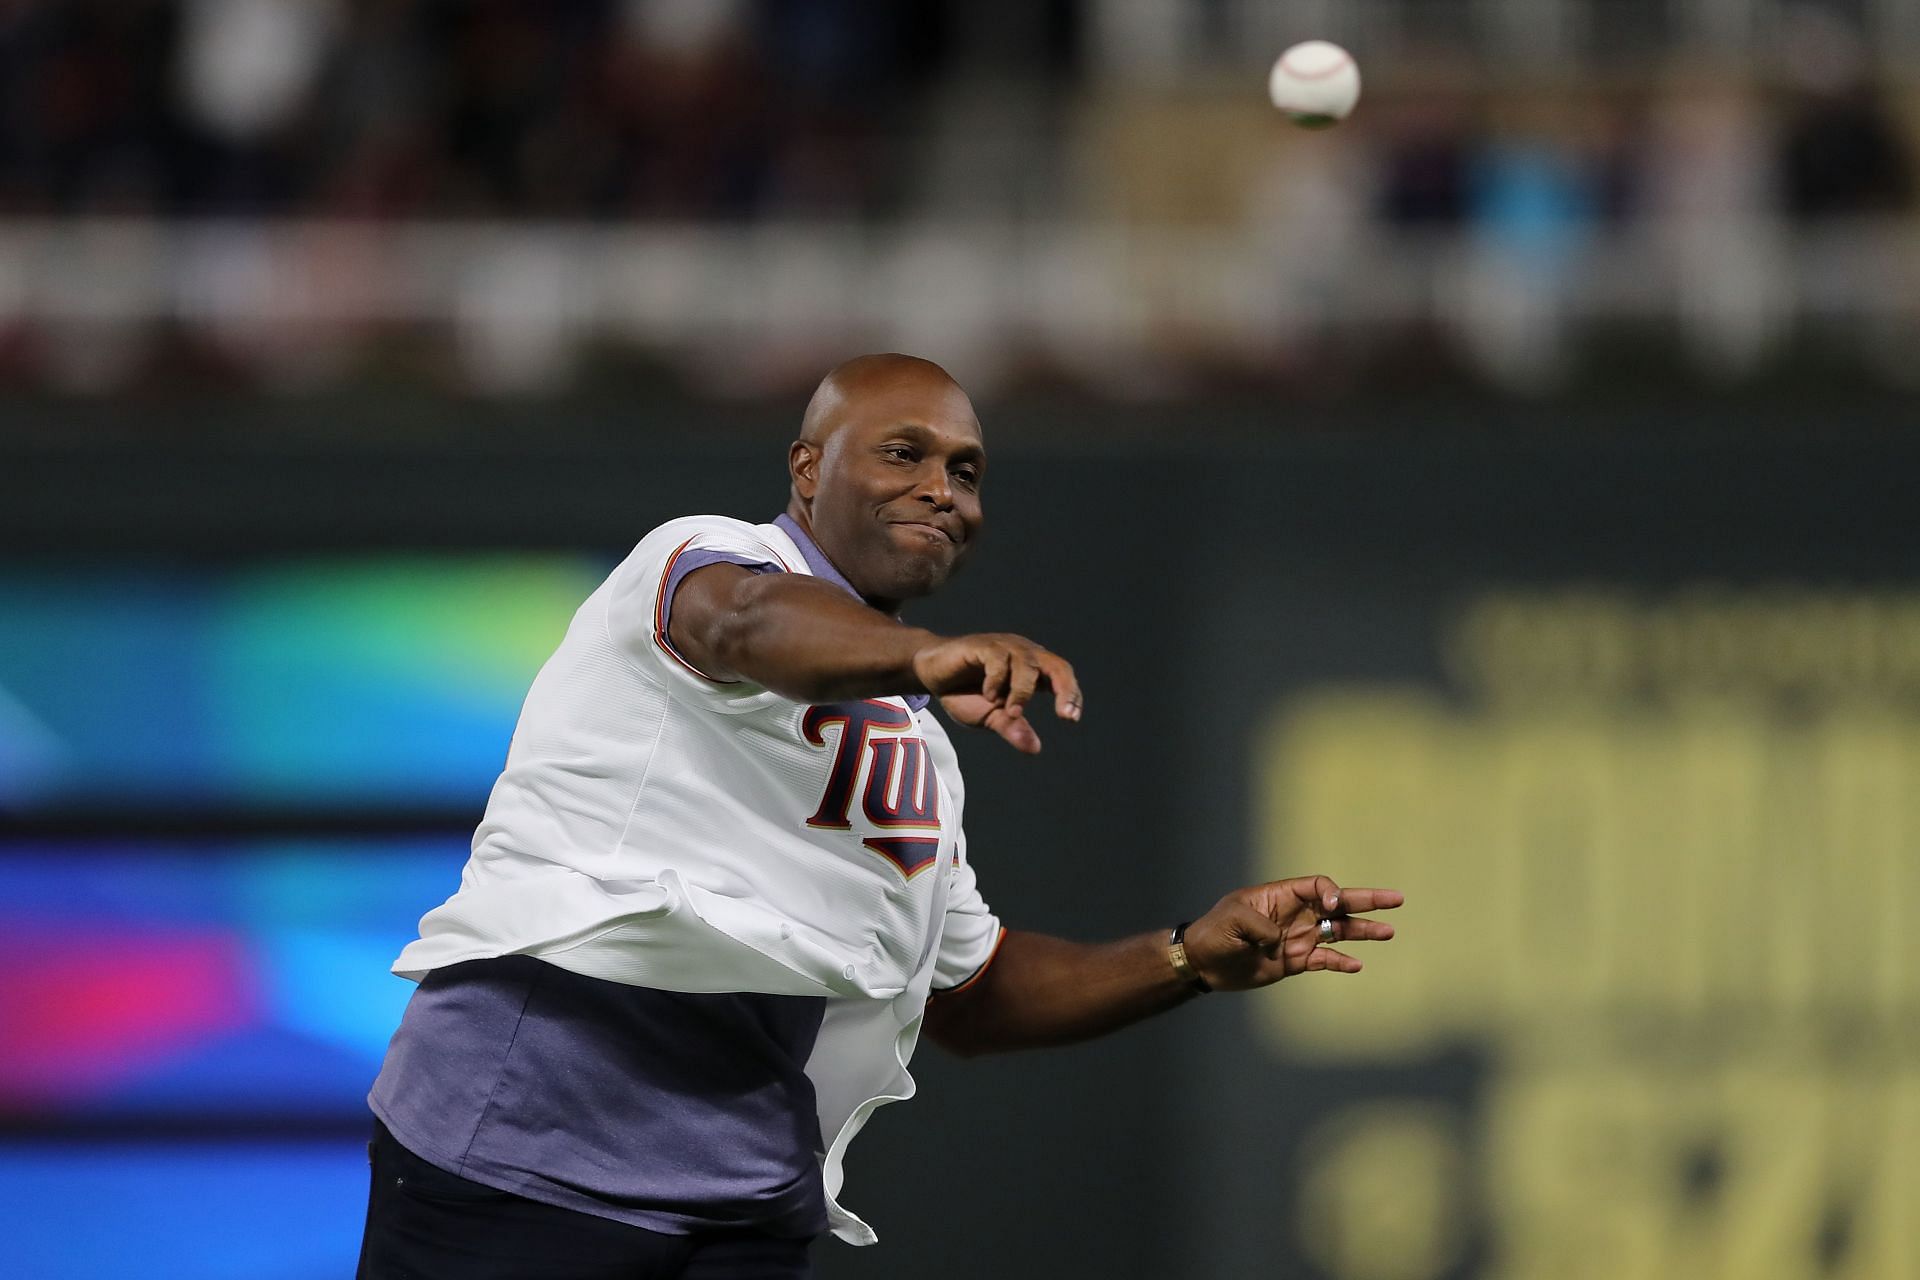 Torii Hunter retires: Twins, Tigers, Angels OF ends career - Sports  Illustrated